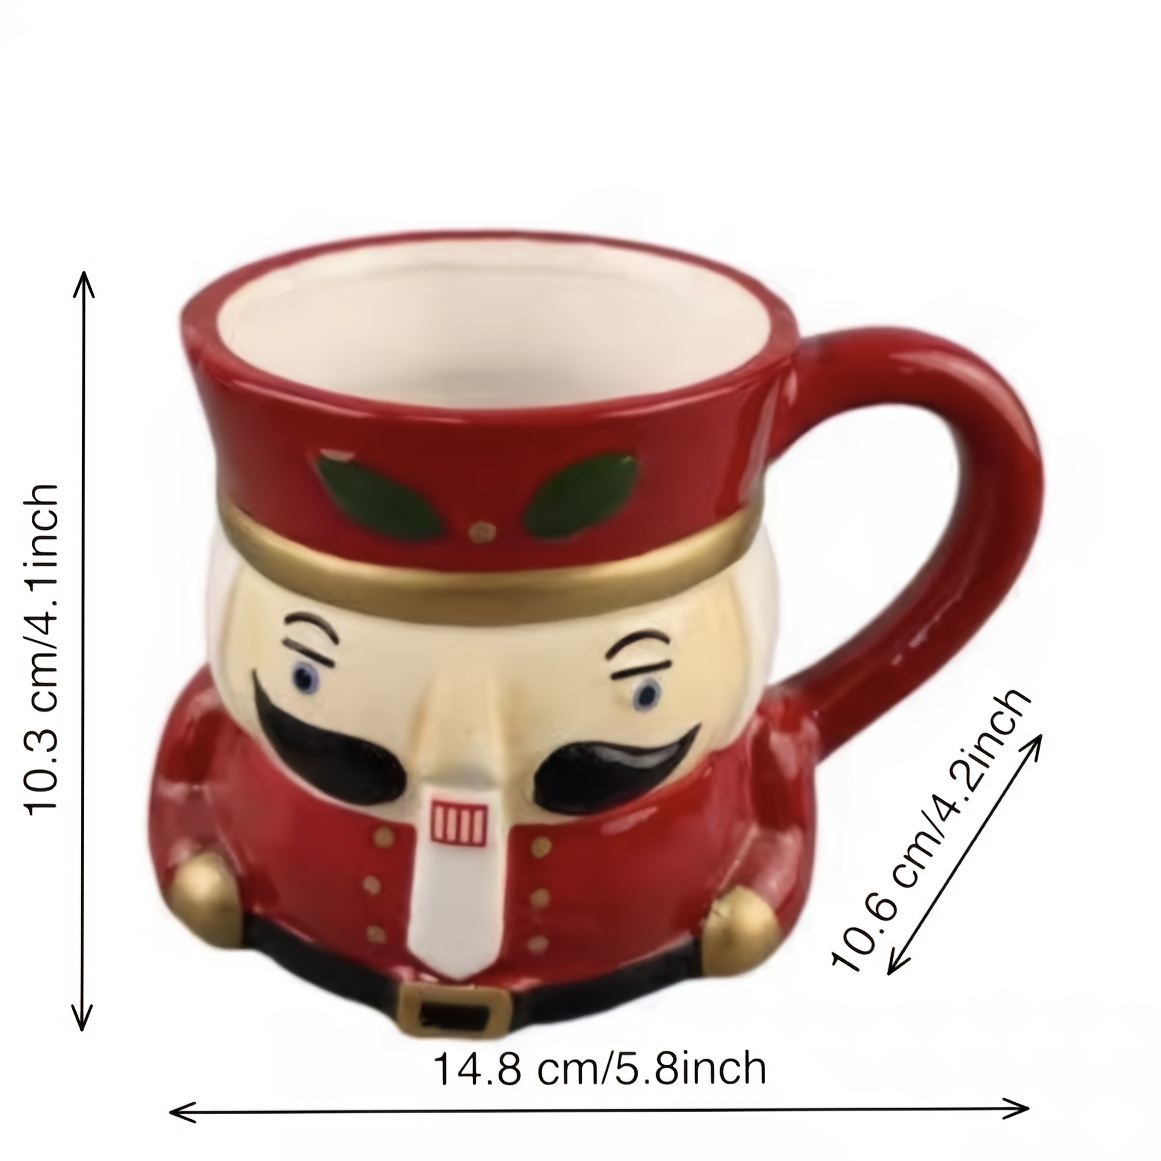 1pc, Cute Gingerbread Man Coffee Mug, 320ml/10.8oz Ceramic Coffee Cups,  Christmas Water Cups For Home And Office, Summer Winter Drinkware,  Christmas G